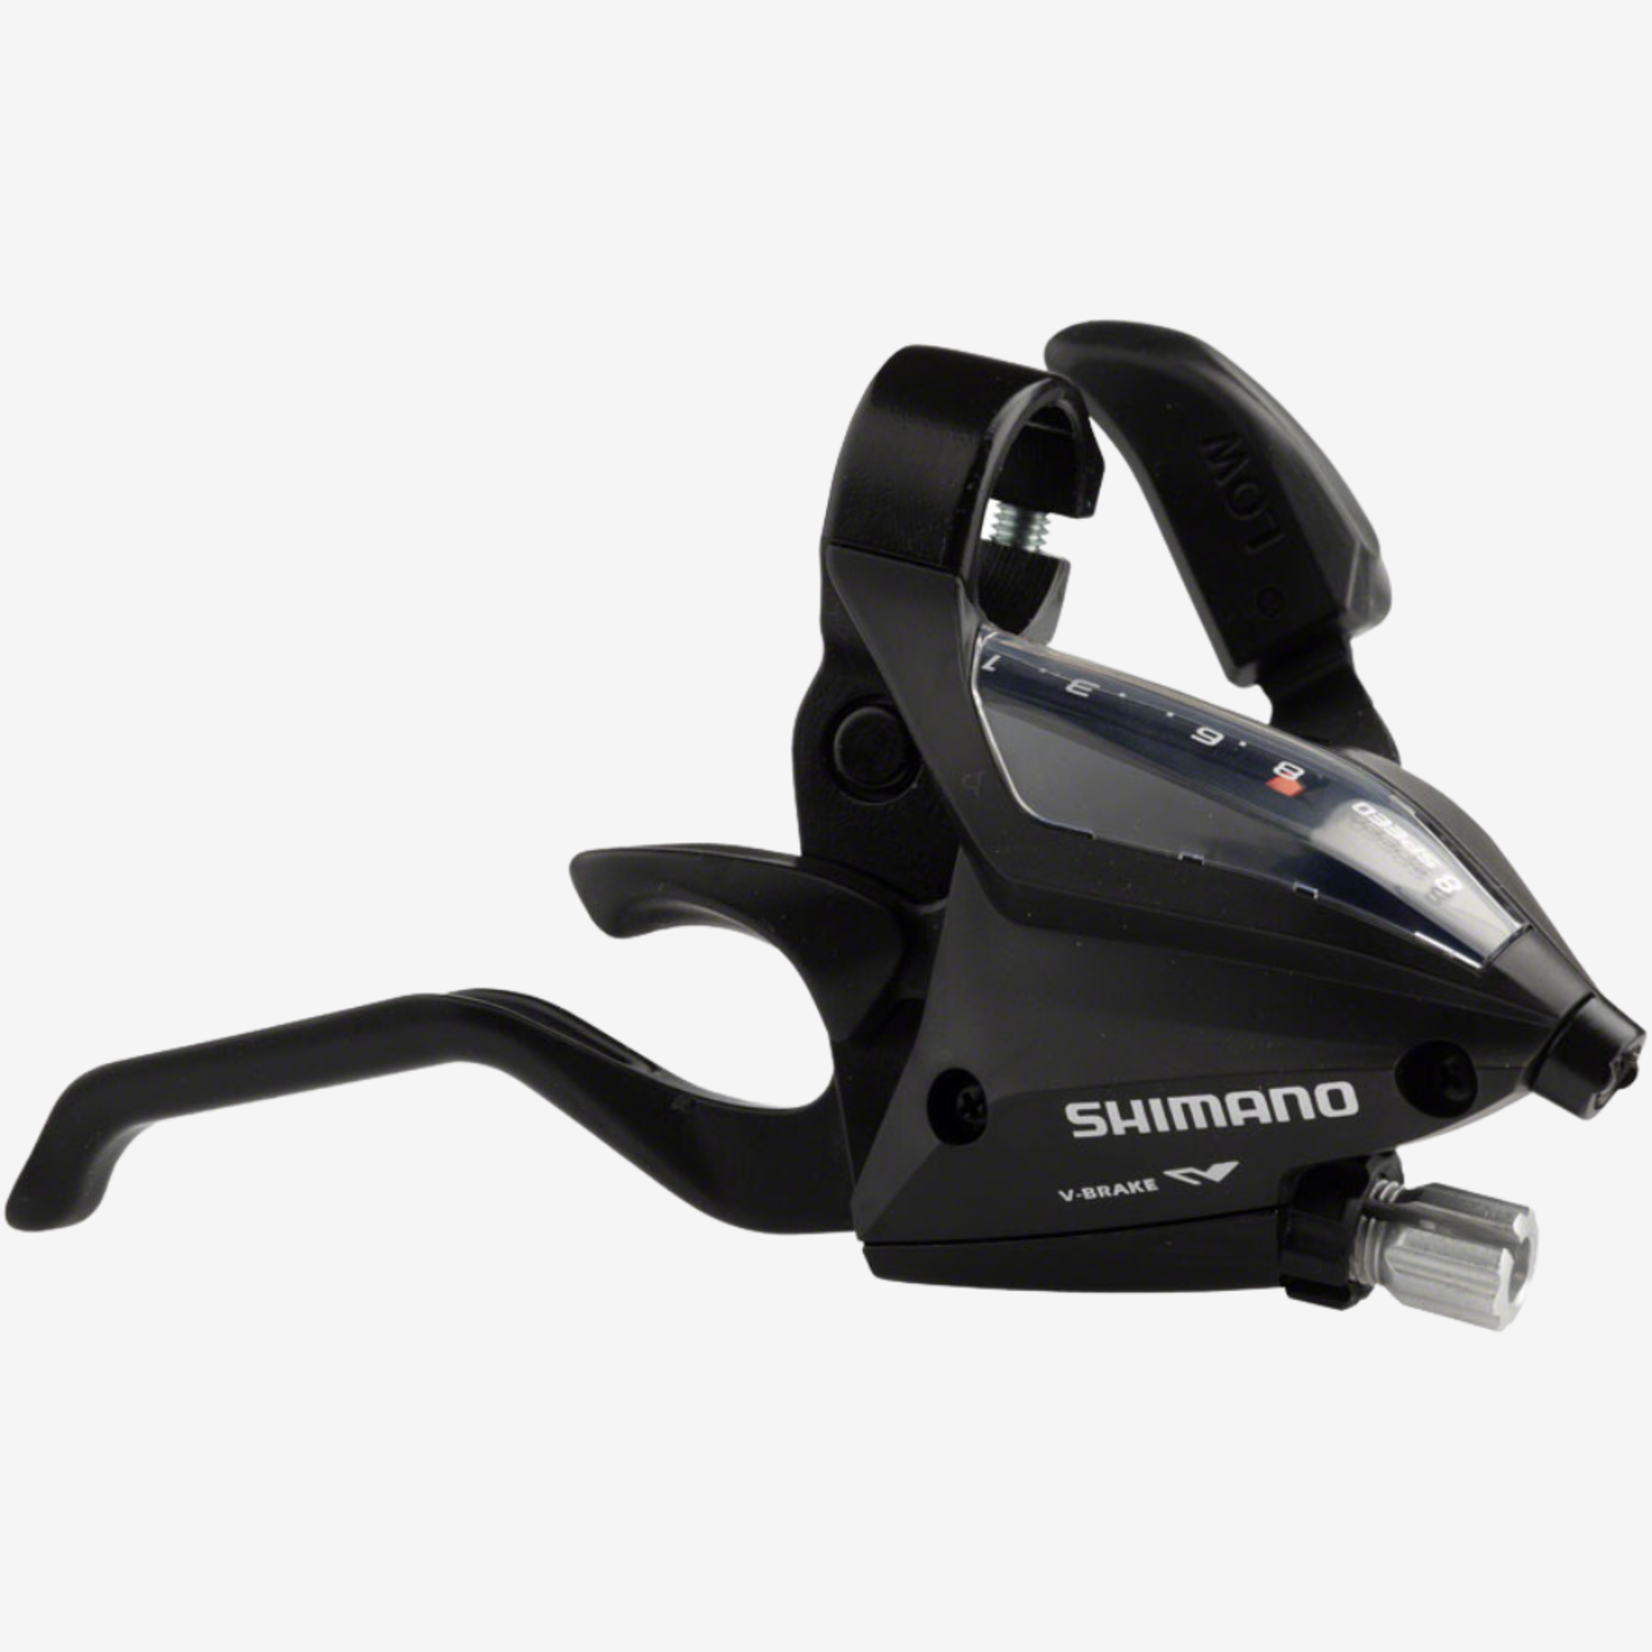 SHIMANO EF500 8-SPEED RIGHT SHIFT LEVER